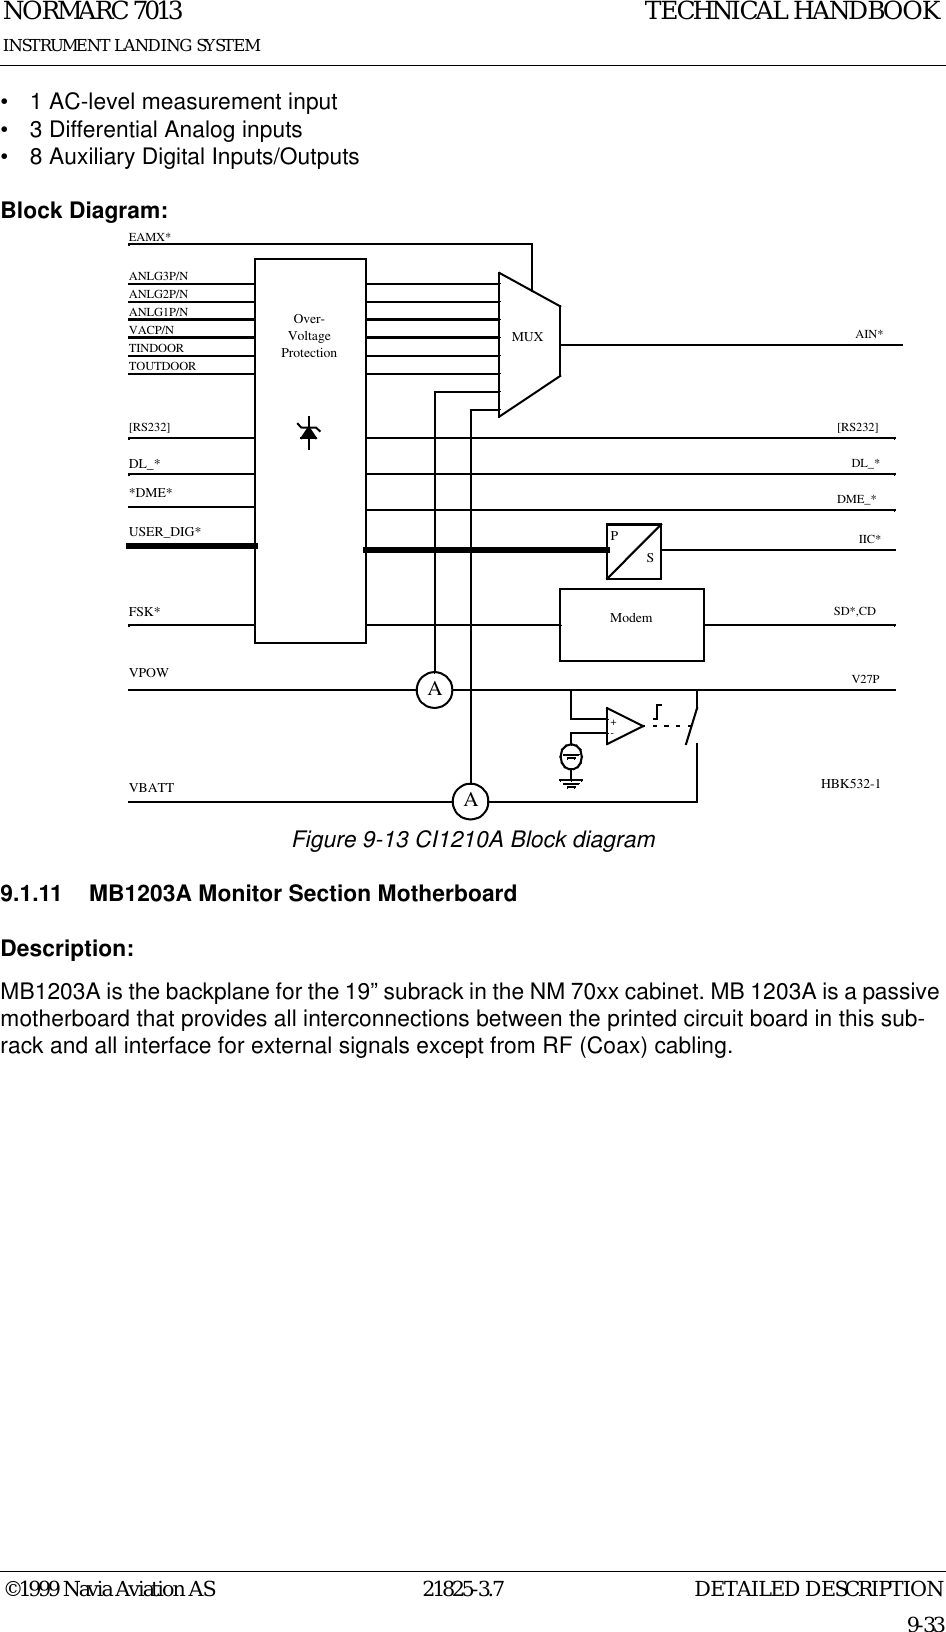 DETAILED DESCRIPTIONNORMARC 701321825-3.79-33INSTRUMENT LANDING SYSTEMTECHNICAL HANDBOOK©1999 Navia Aviation AS• 1 AC-level measurement input• 3 Differential Analog inputs• 8 Auxiliary Digital Inputs/OutputsBlock Diagram:Figure 9-13 CI1210A Block diagram9.1.11 MB1203A Monitor Section MotherboardDescription:MB1203A is the backplane for the 19” subrack in the NM 70xx cabinet. MB 1203A is a passive motherboard that provides all interconnections between the printed circuit board in this sub-rack and all interface for external signals except from RF (Coax) cabling.+-AAPSModemMUXTOUTDOORTINDOORVACP/NANLG3P/NANLG2P/NANLG1P/NEAMX*AIN*USER_DIG*FSK*SD*,CDVPOWVBATTV27PIIC*[RS232]DL_*[RS232]DL_*Over-VoltageProtection*DME*DME_*HBK532-1